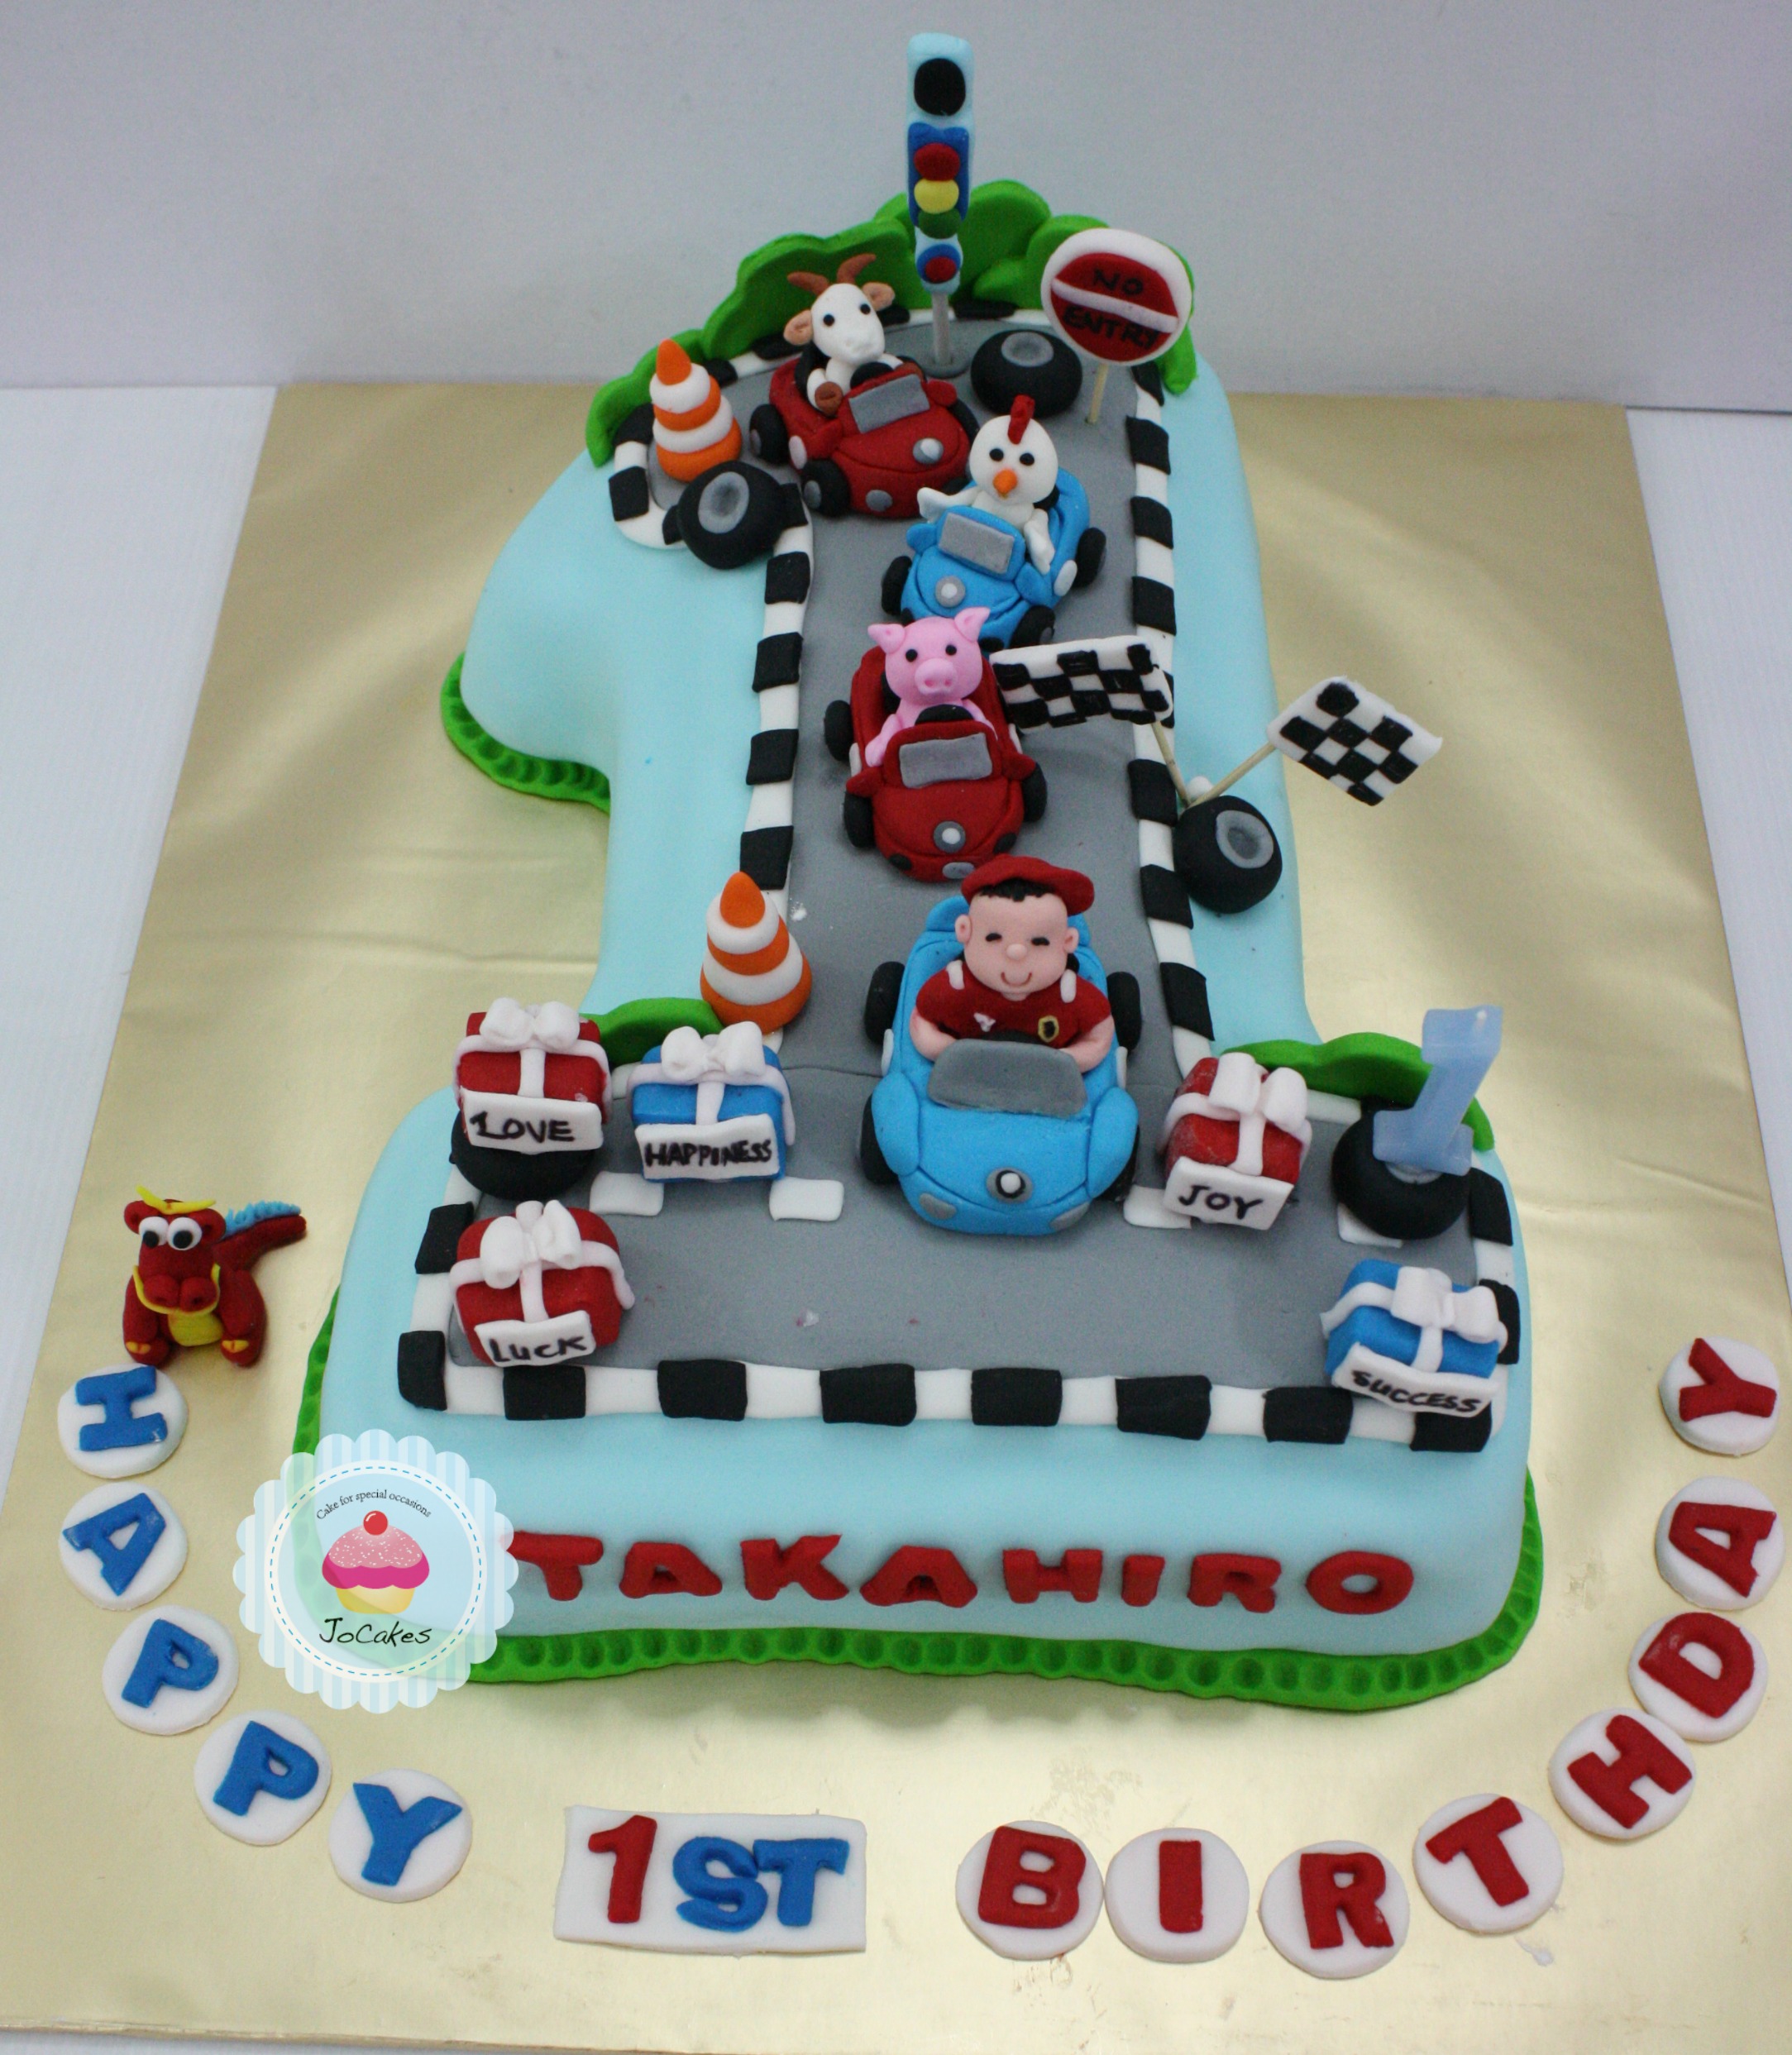 Discover more than 75 1st birthday car cake latest - awesomeenglish.edu.vn